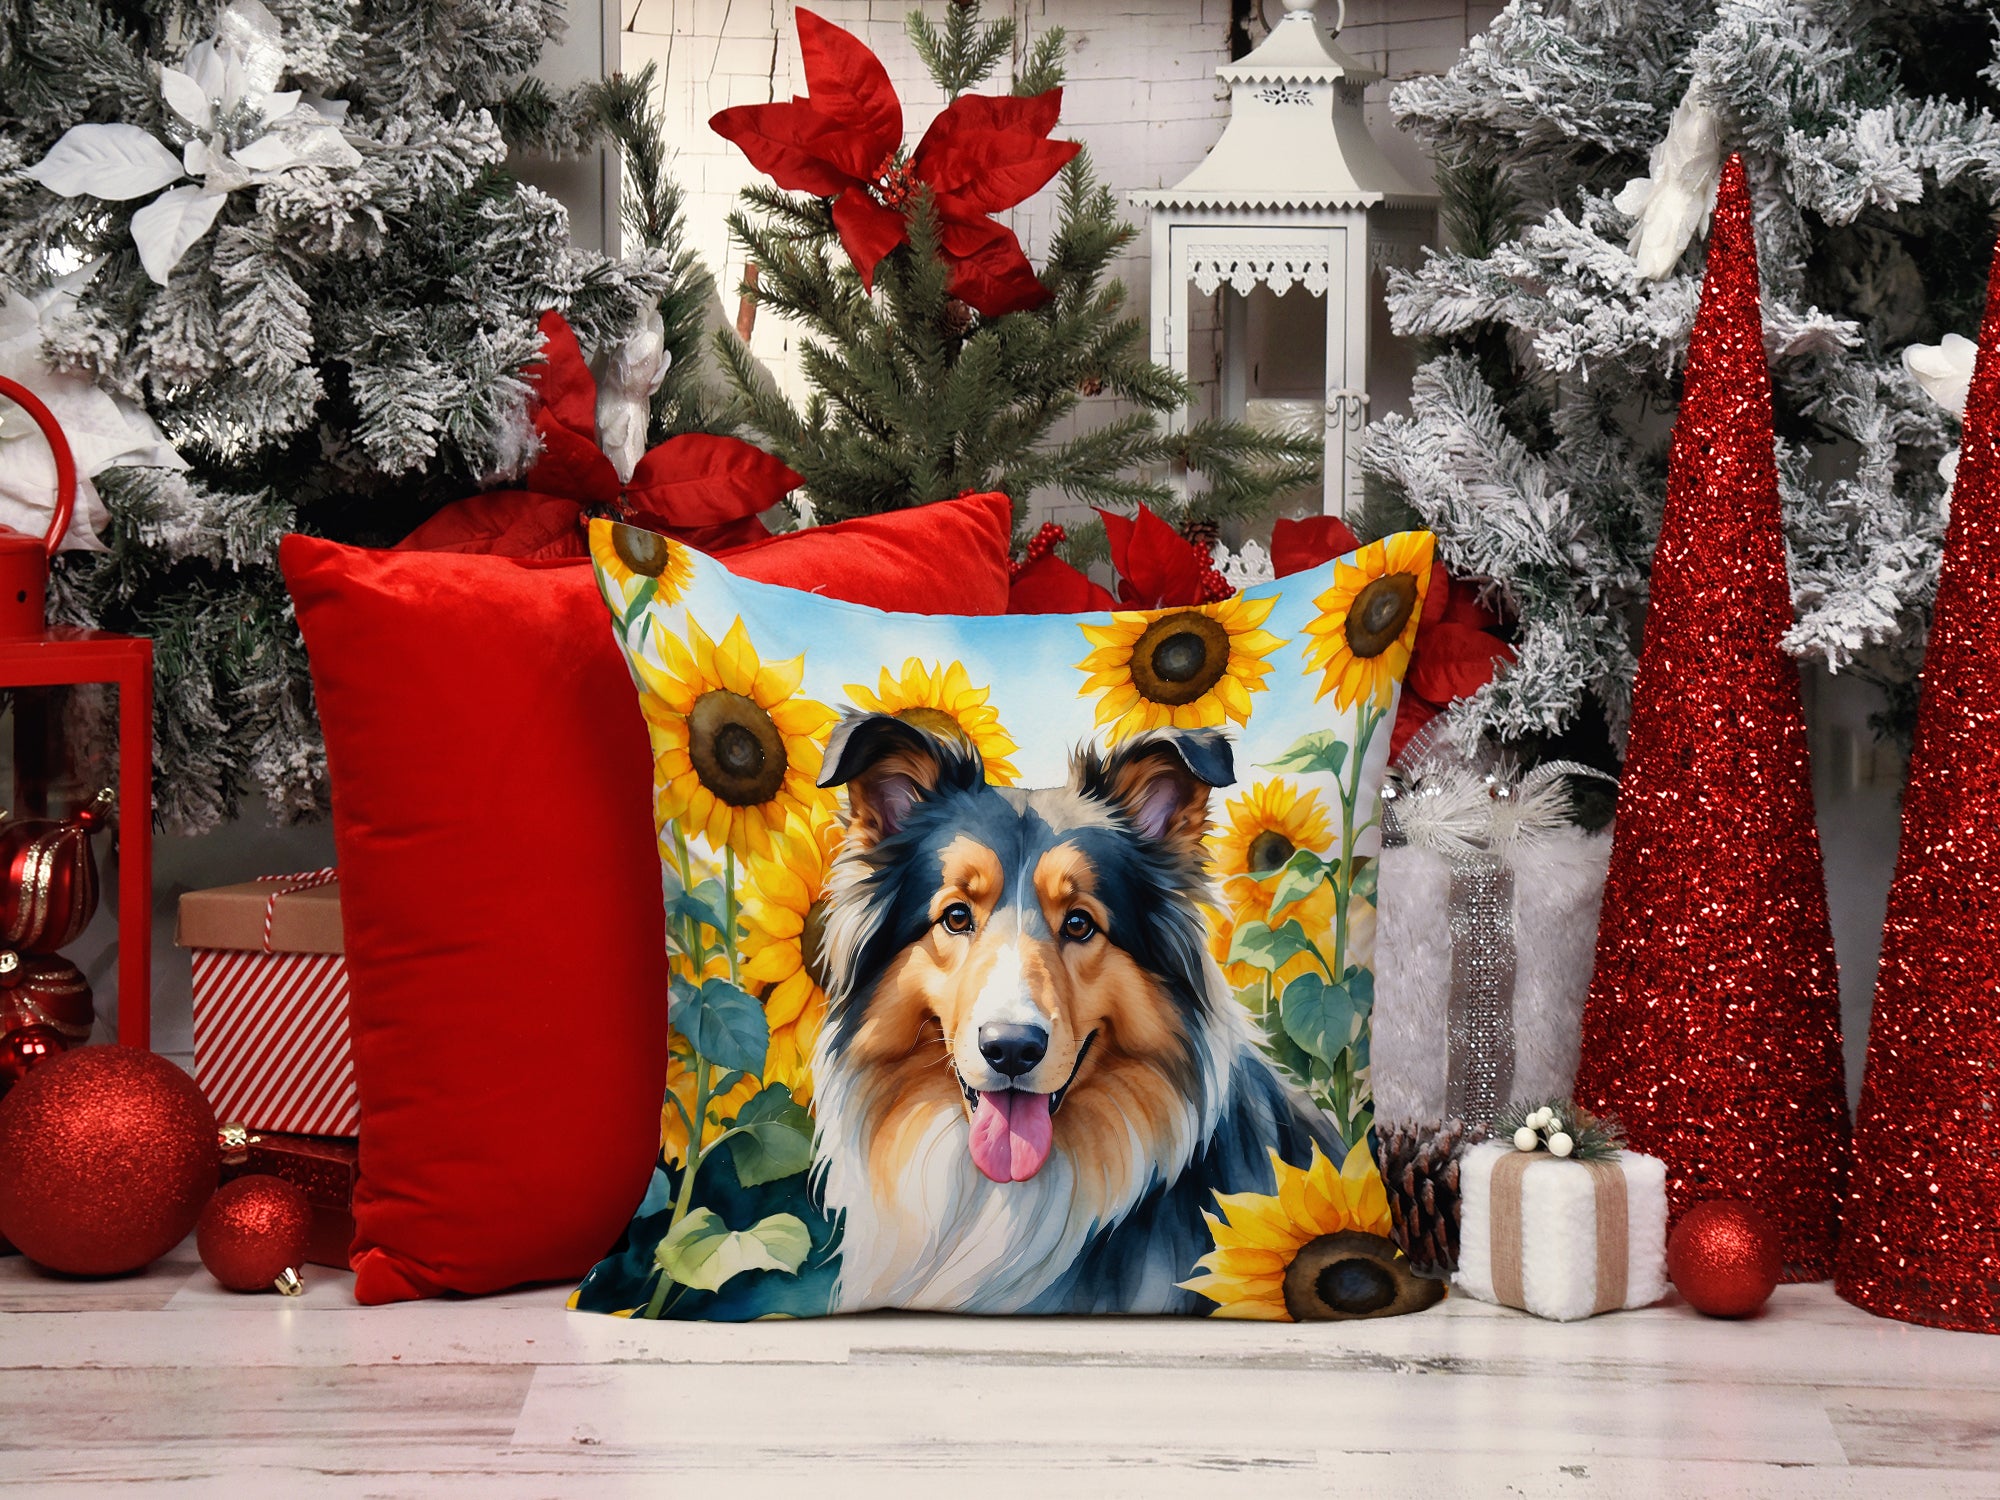 Collie in Sunflowers Throw Pillow